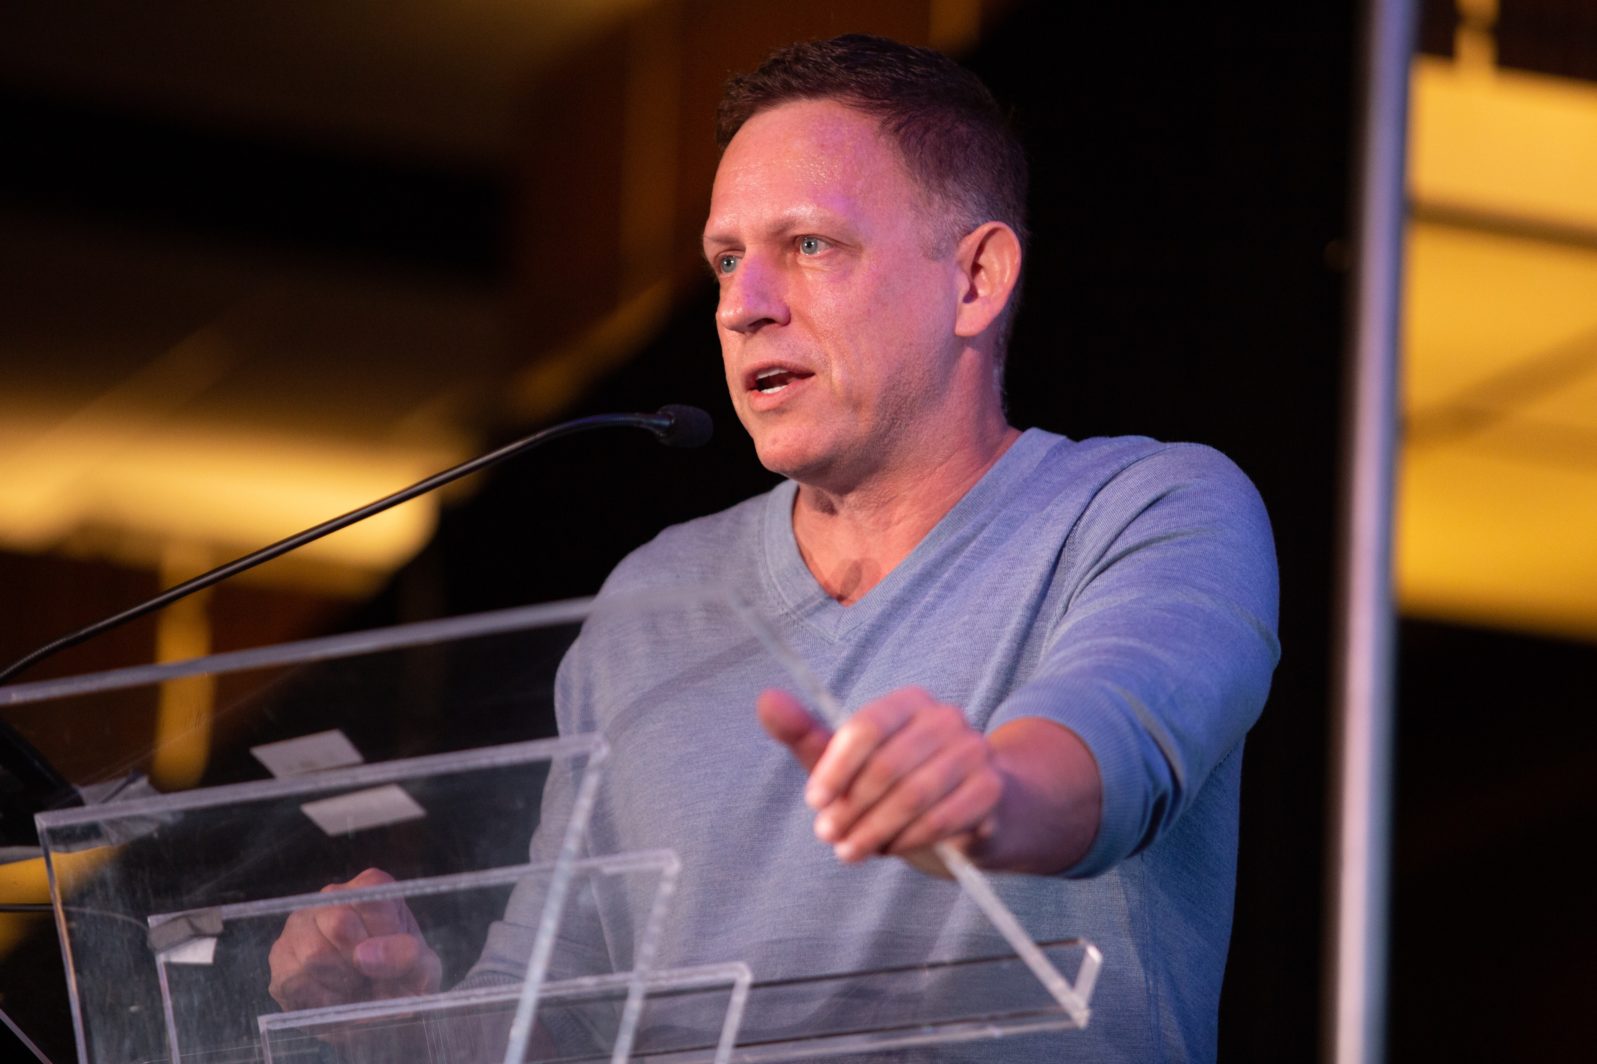 Peter Thiel at COSM 2021 on Artificial General Intelligence